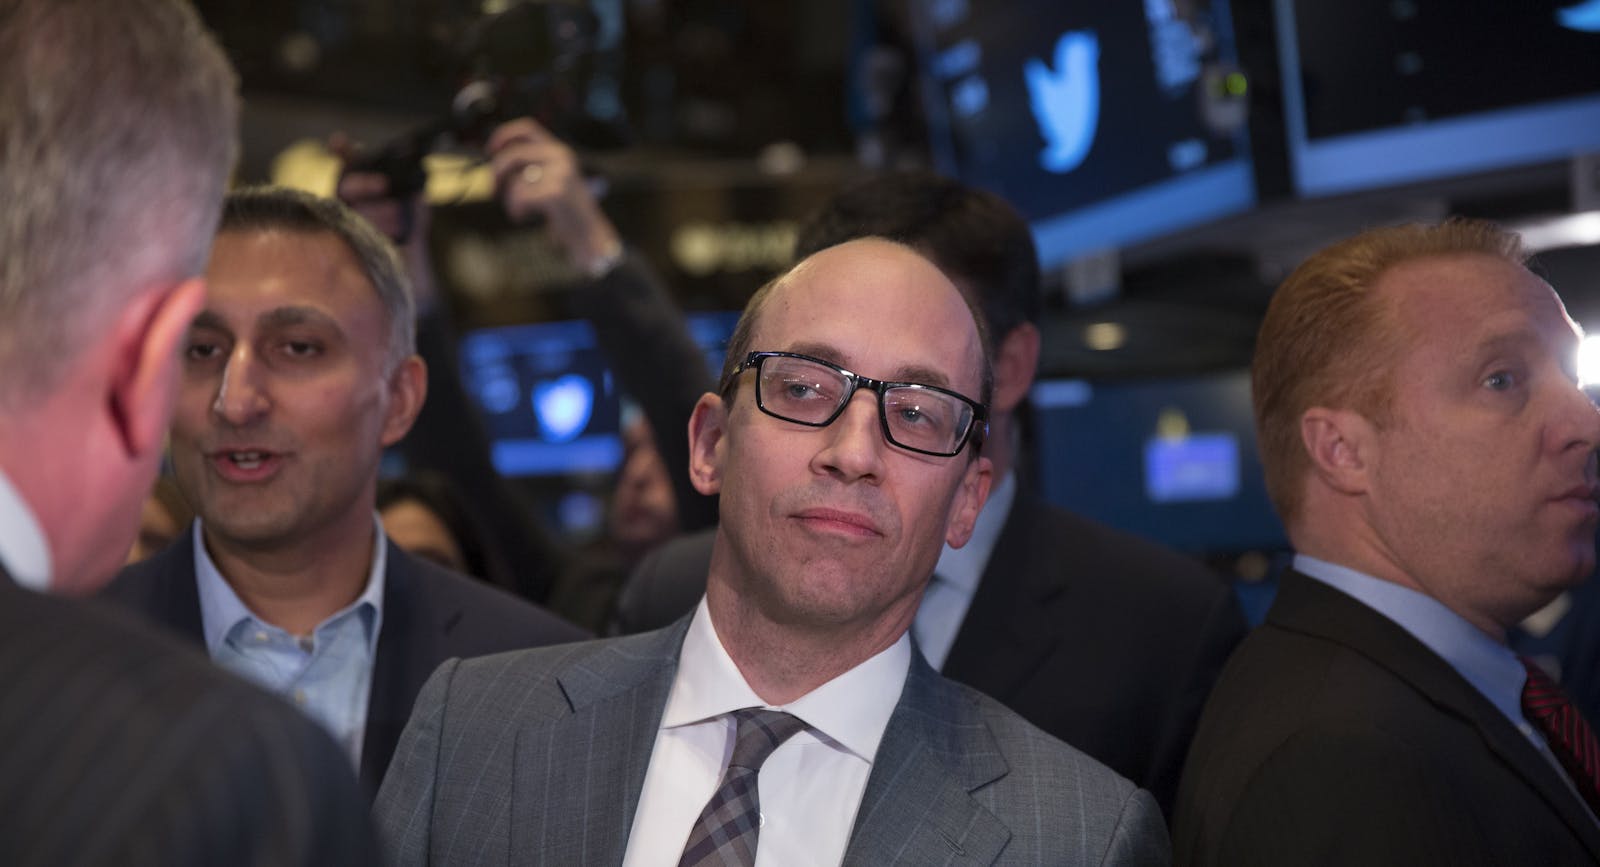 Twitter CEO Dick Costolo. Photo by Bloomberg.